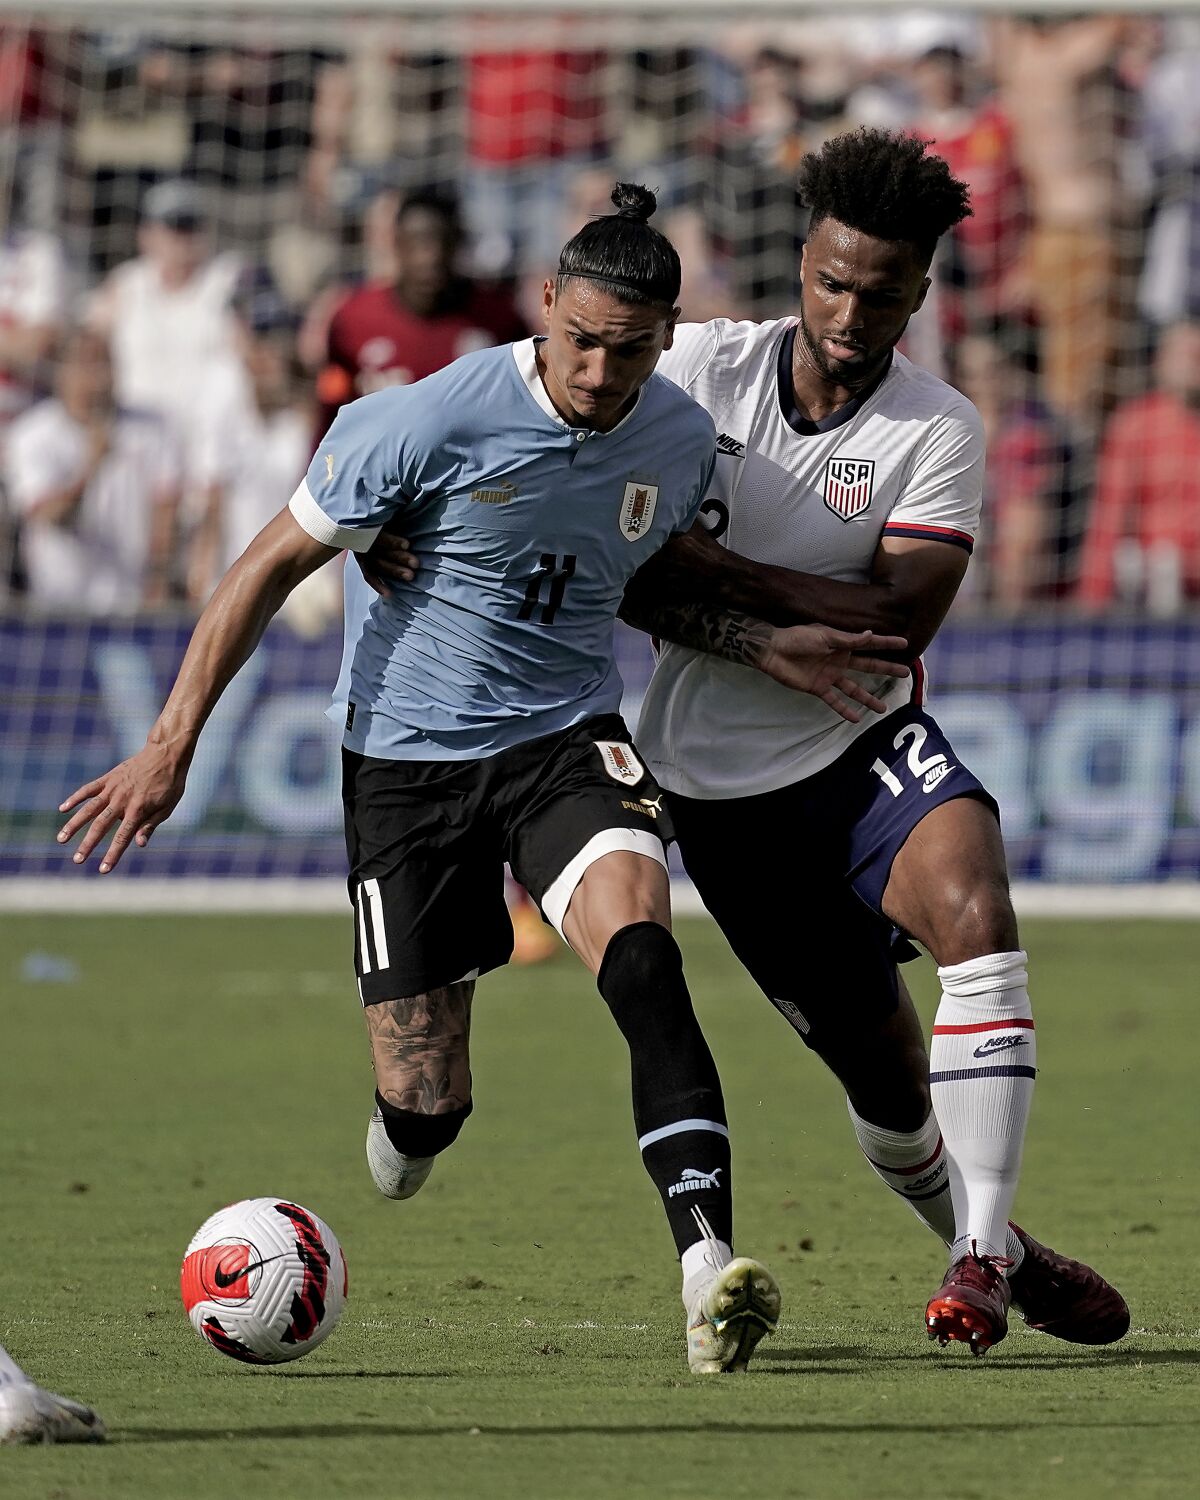 Uruguay forward Darwin Nunez (11) and USA defender Erik Palmer-Brown (12) chase the ball during the second half of an international friendly soccer match Sunday, June 5, 2022, in Kansas City, Kan. The match ended in a 0-0 tie. (AP Photo/Charlie Riedel)